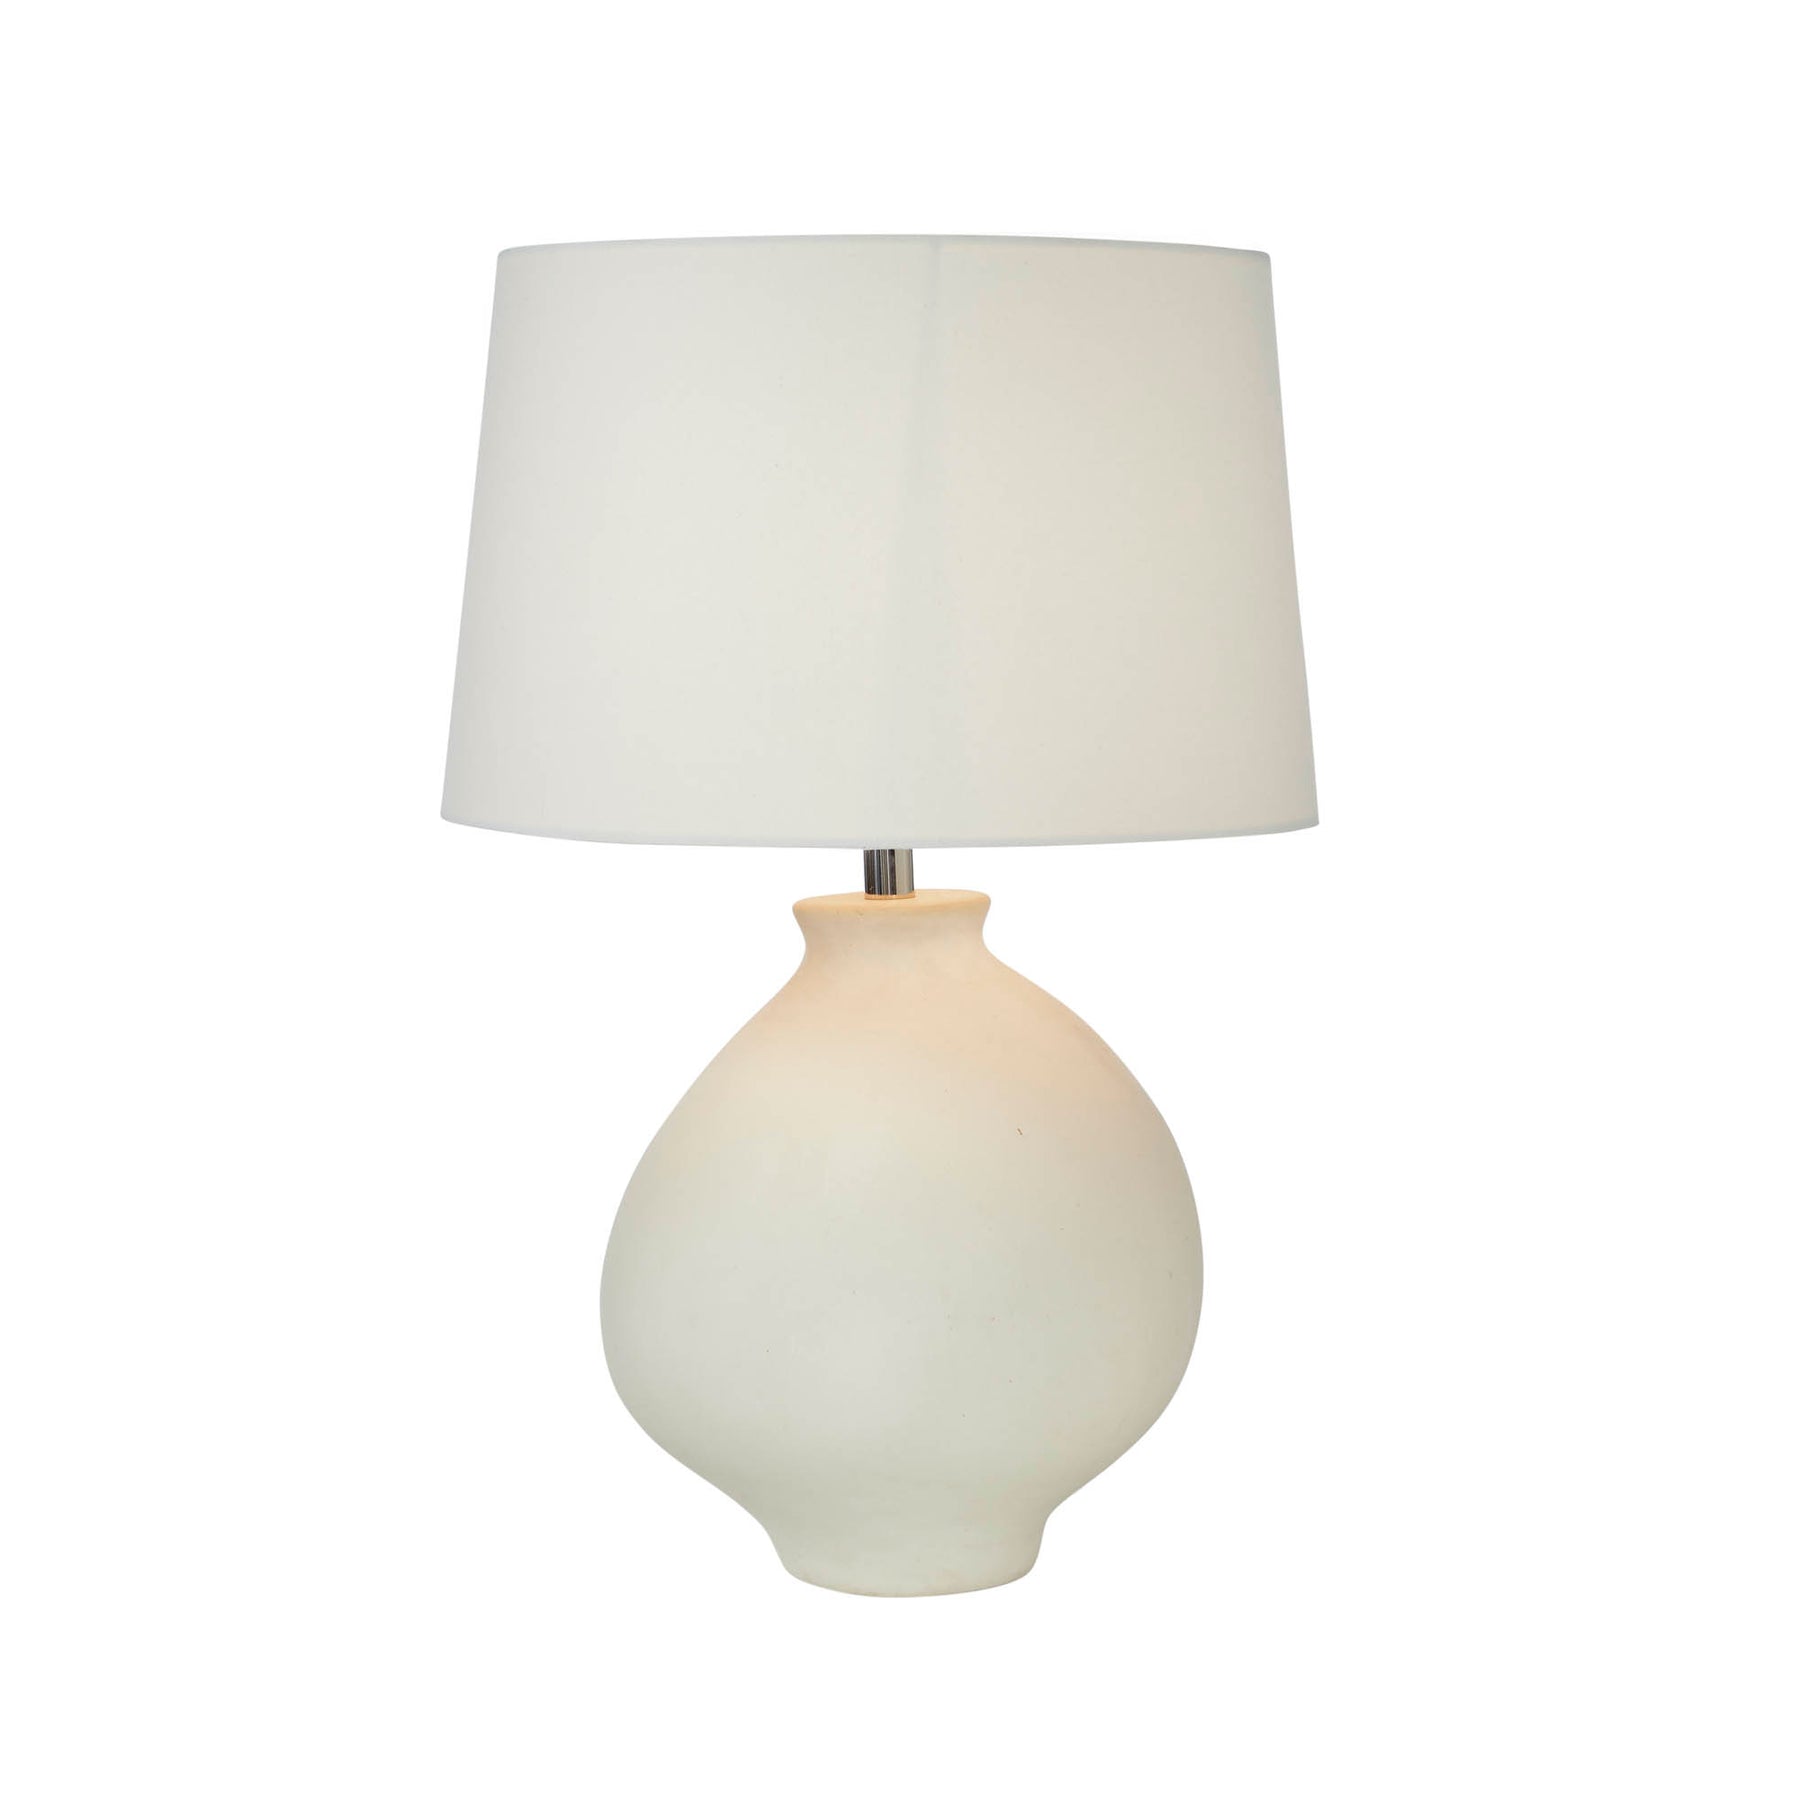 LH Imports, Percy Table Lamp